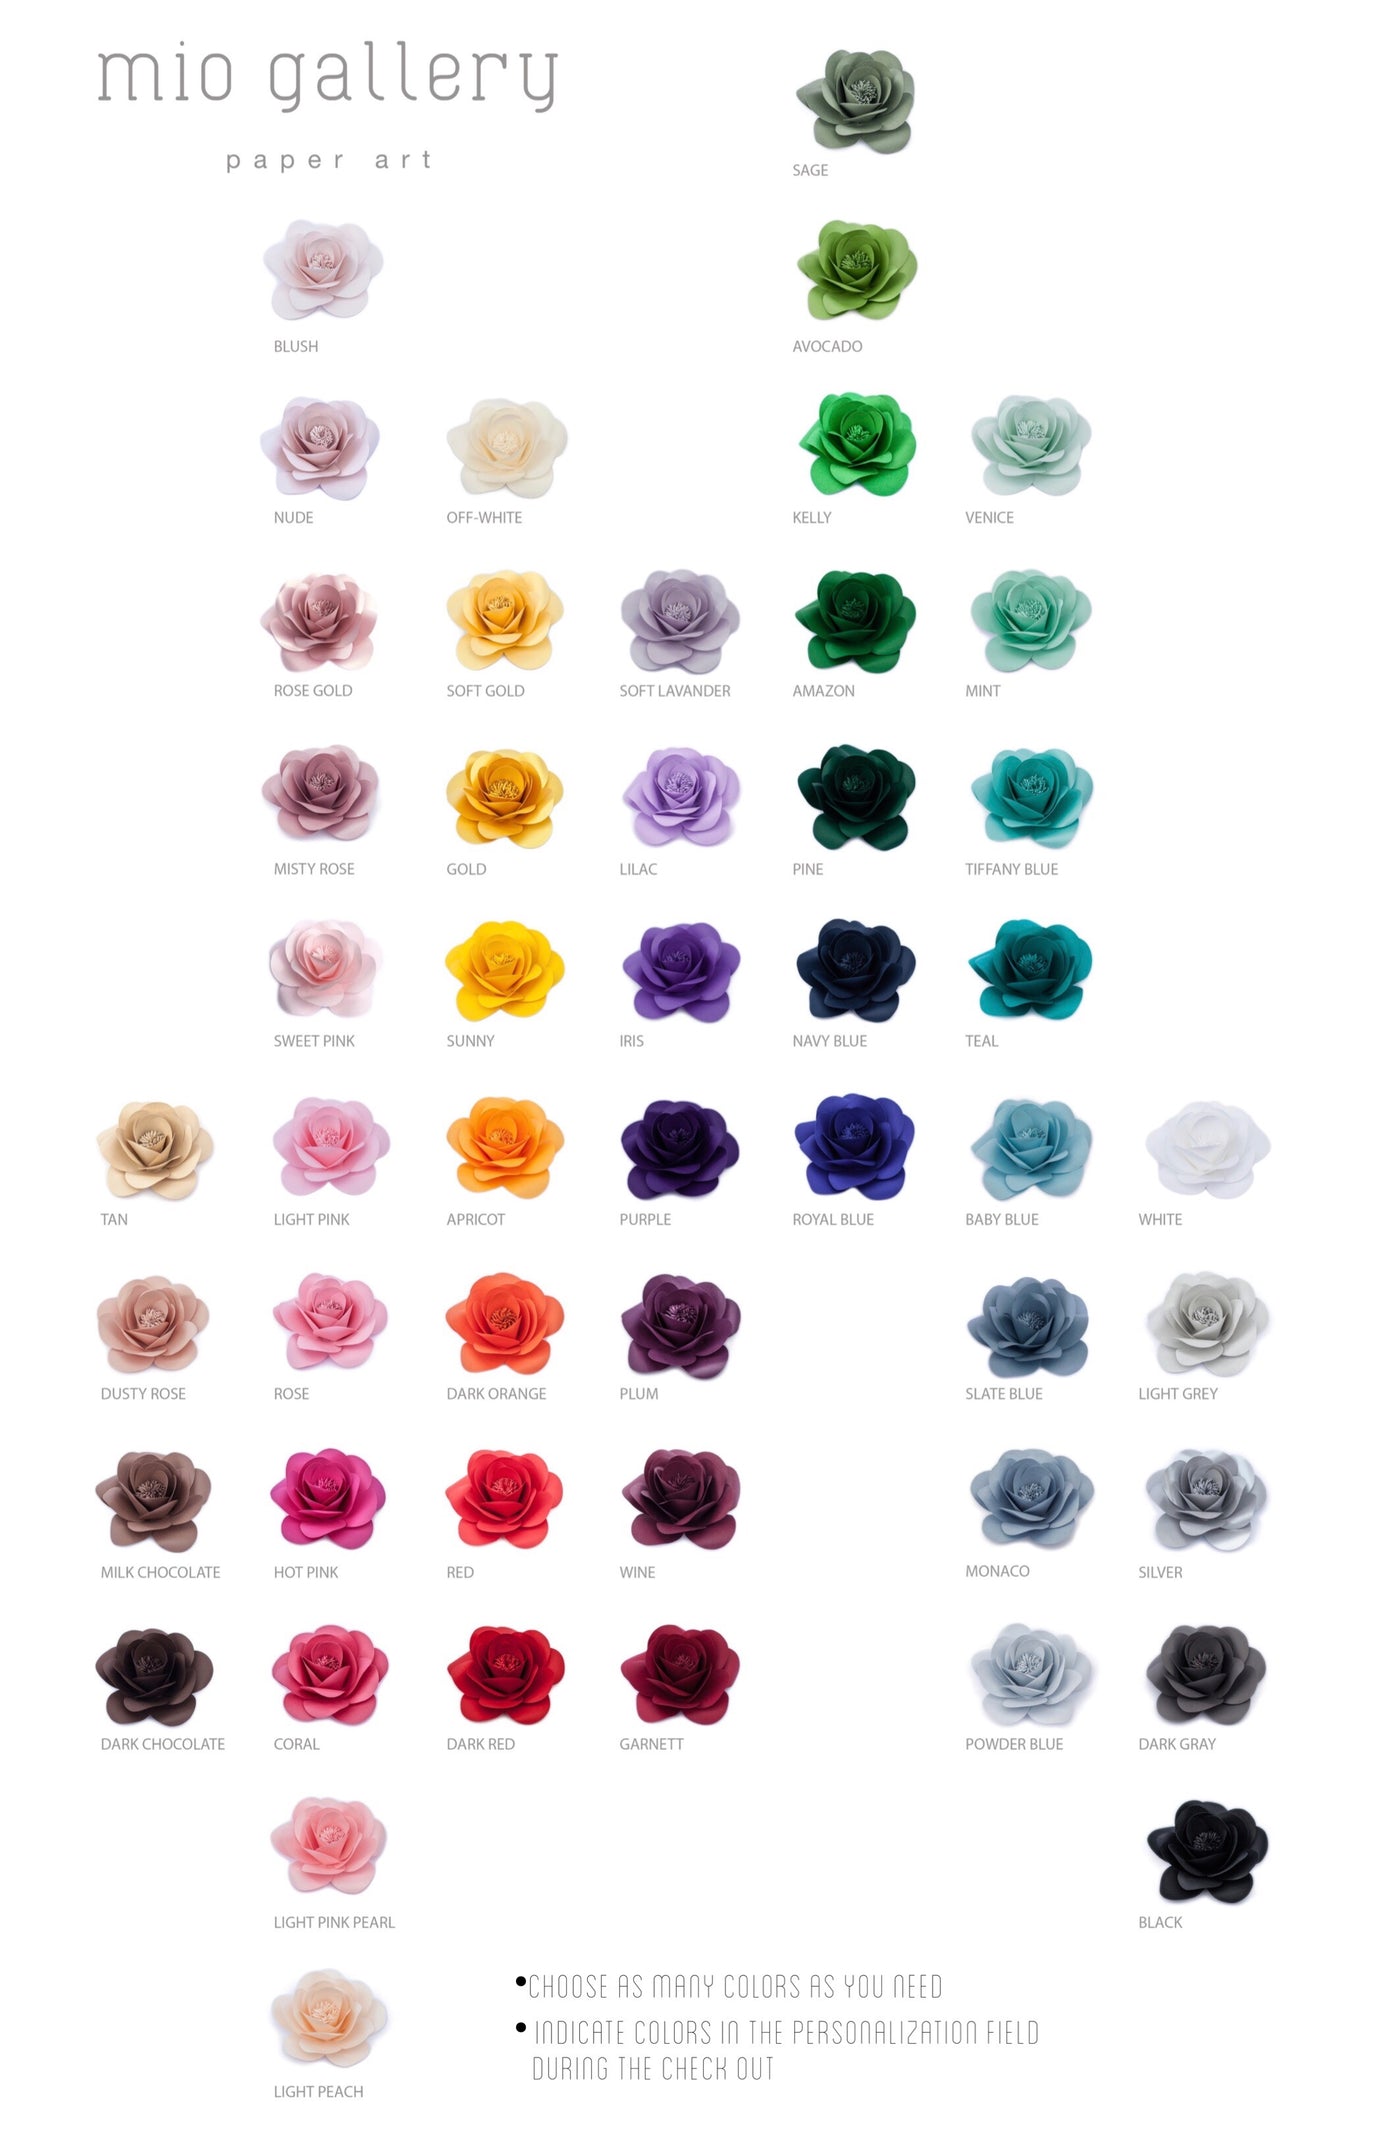 Endless possibilities with 50 vibrant colors for crafting paper flowers